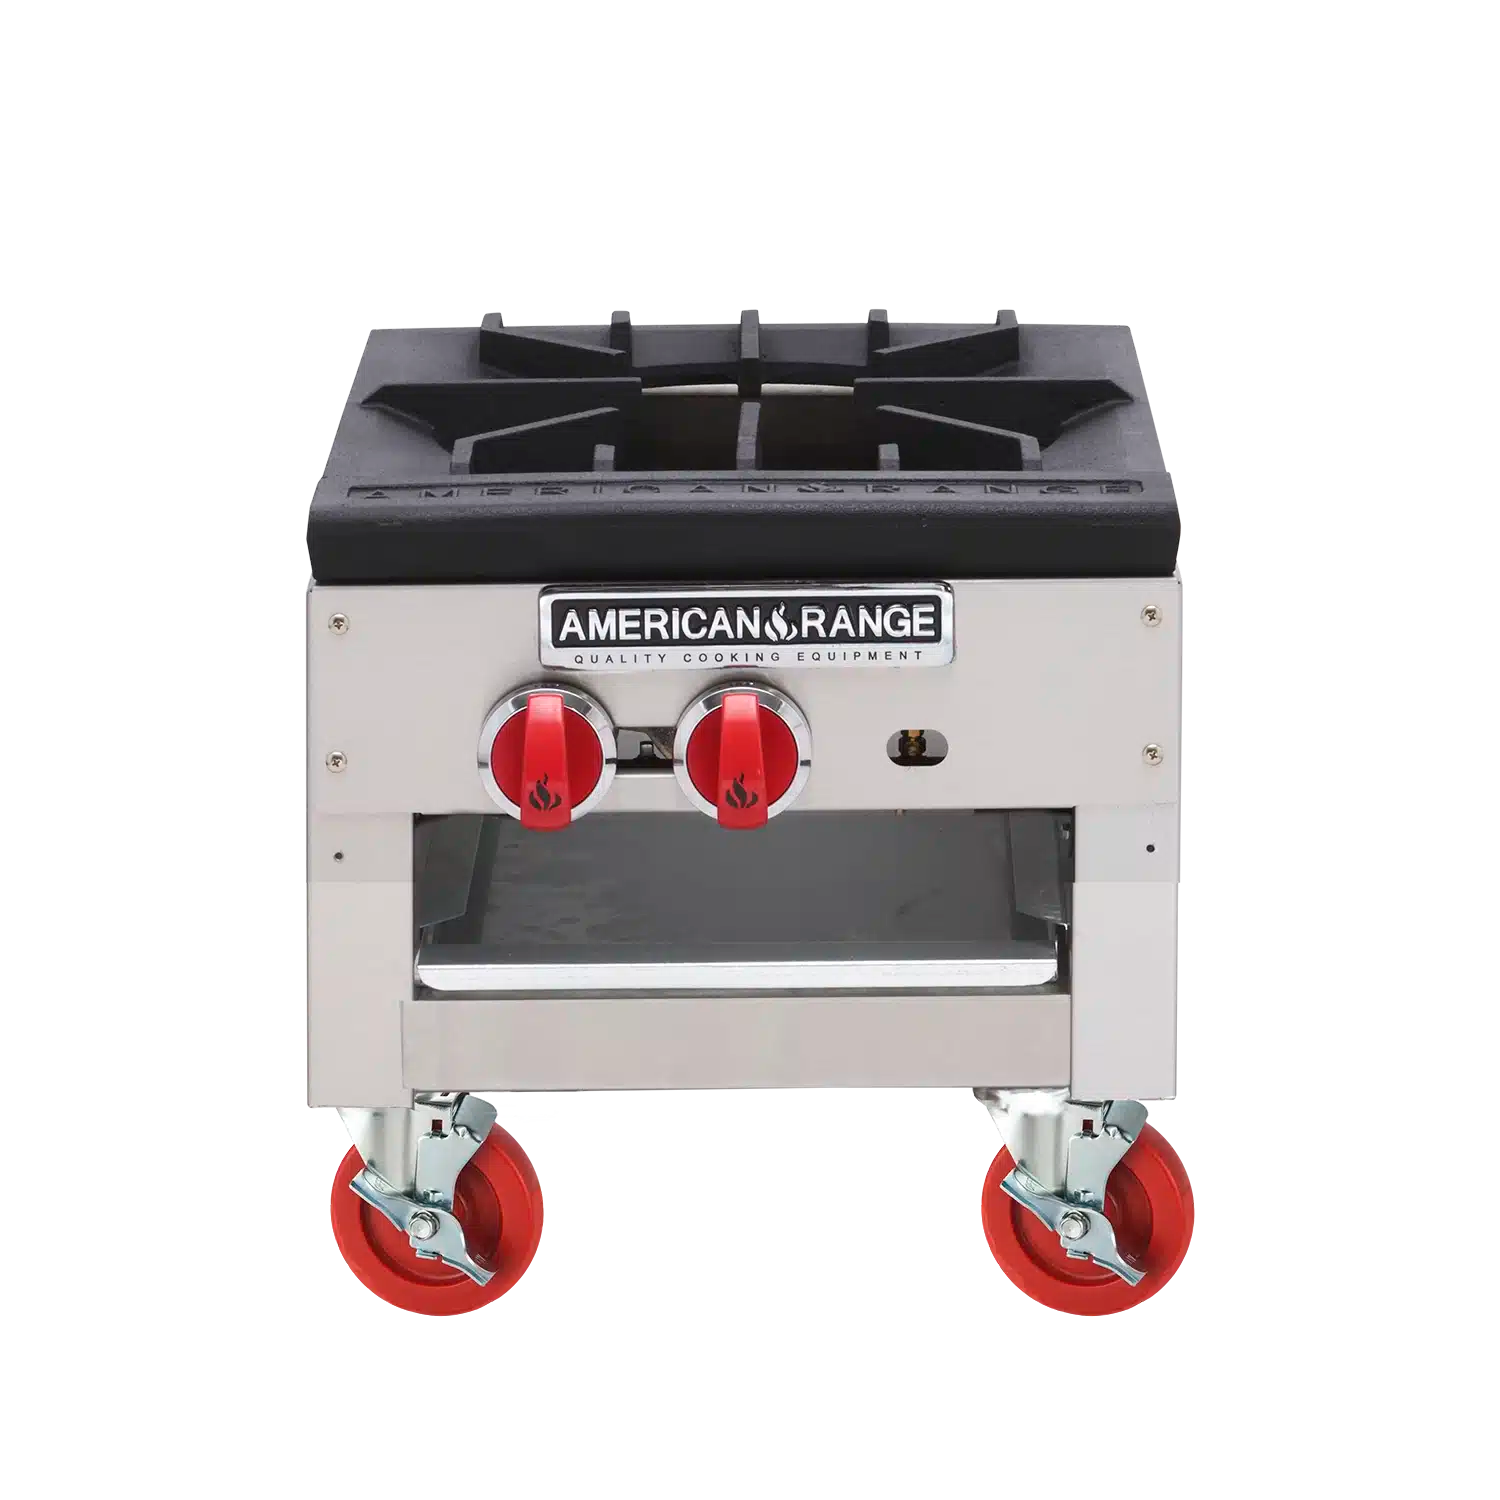 American Range ARSP-18 Stock Pot Range Gas 3-ring Burner With Cast Iron Top Grate